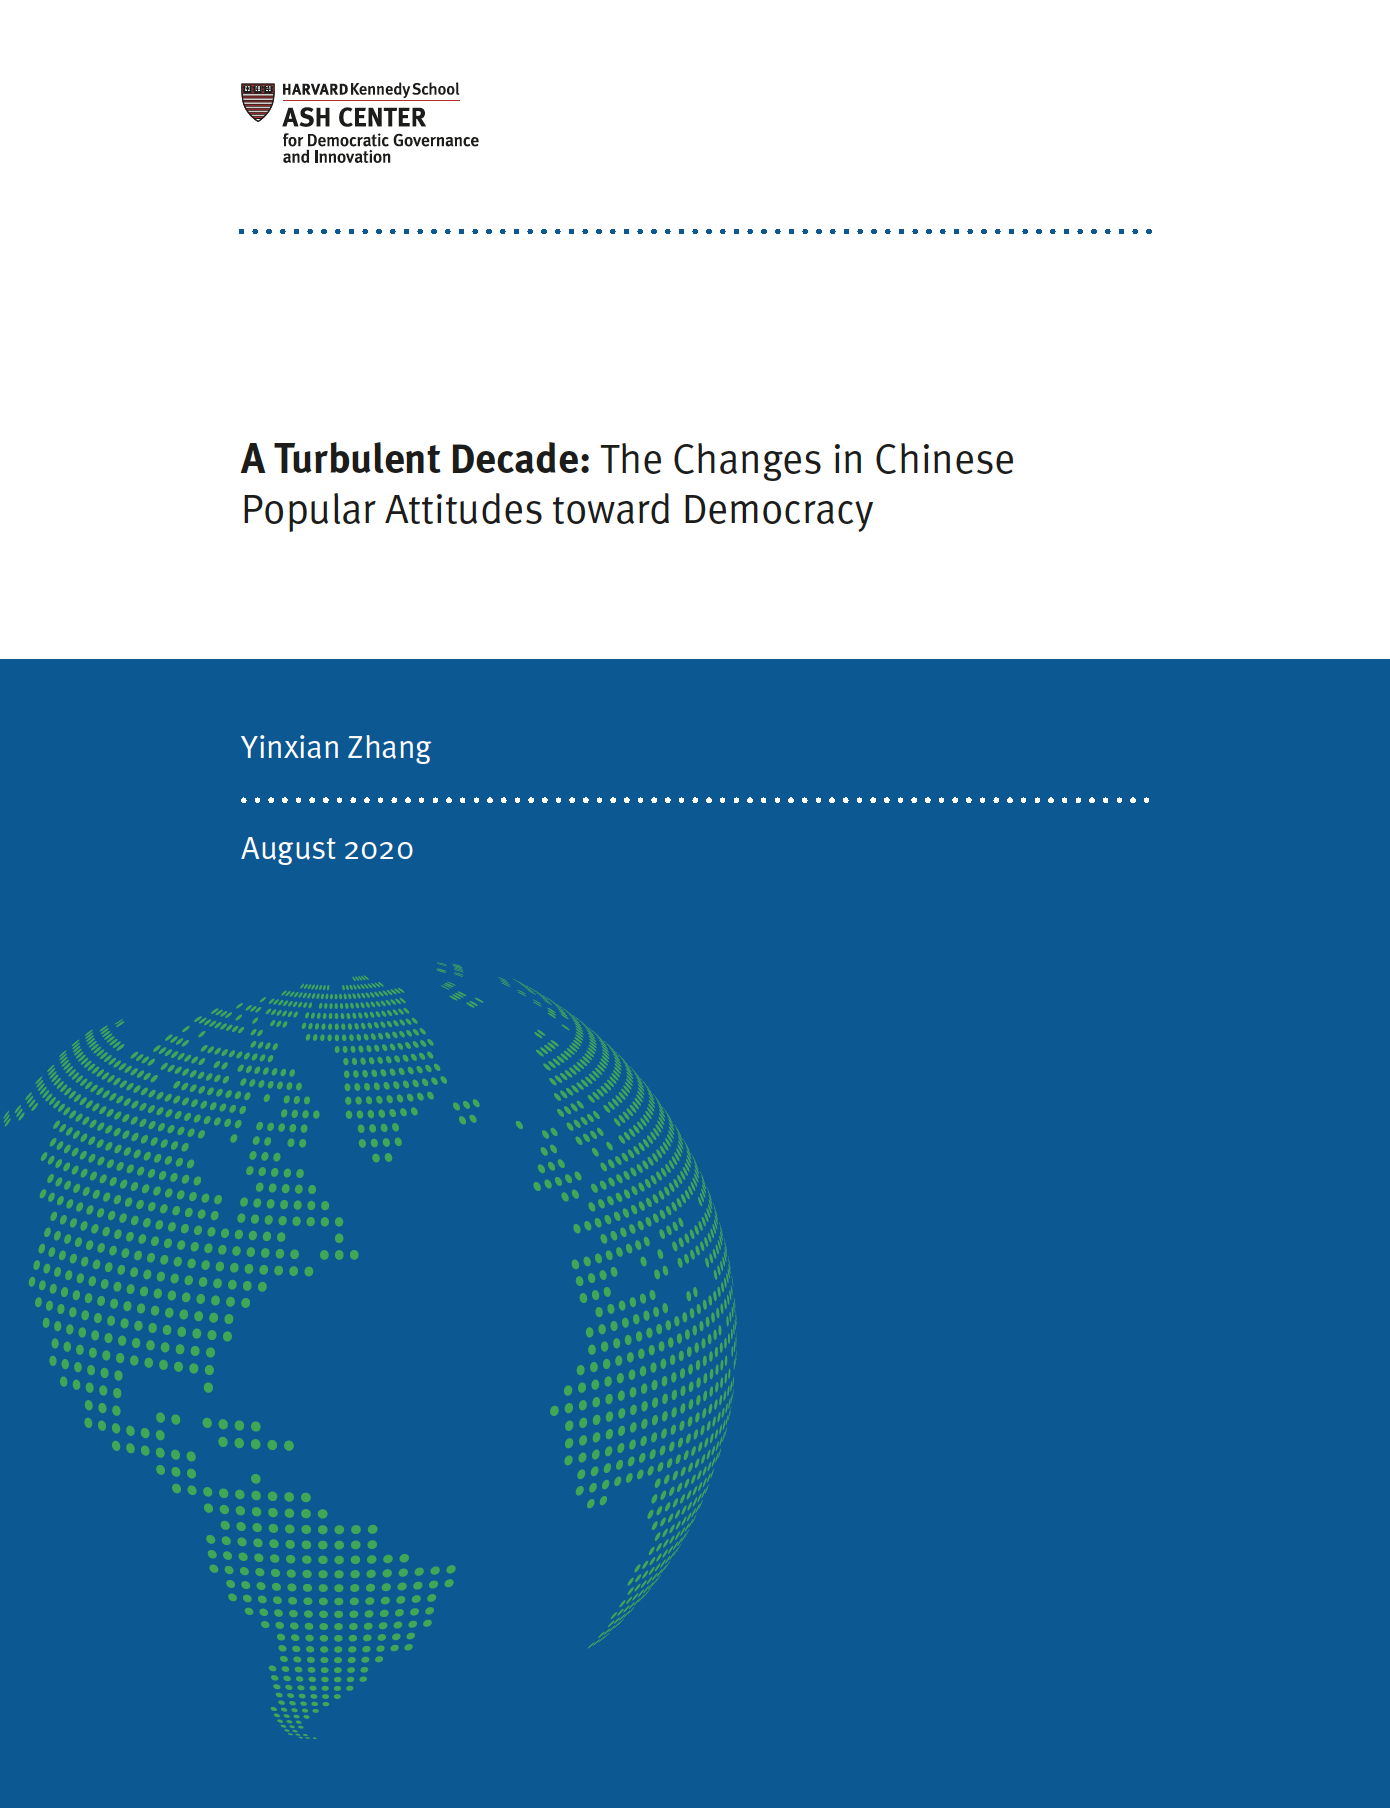 A Turbulent Decade: The Changes in Chinese Popular Attitudes toward Democracy